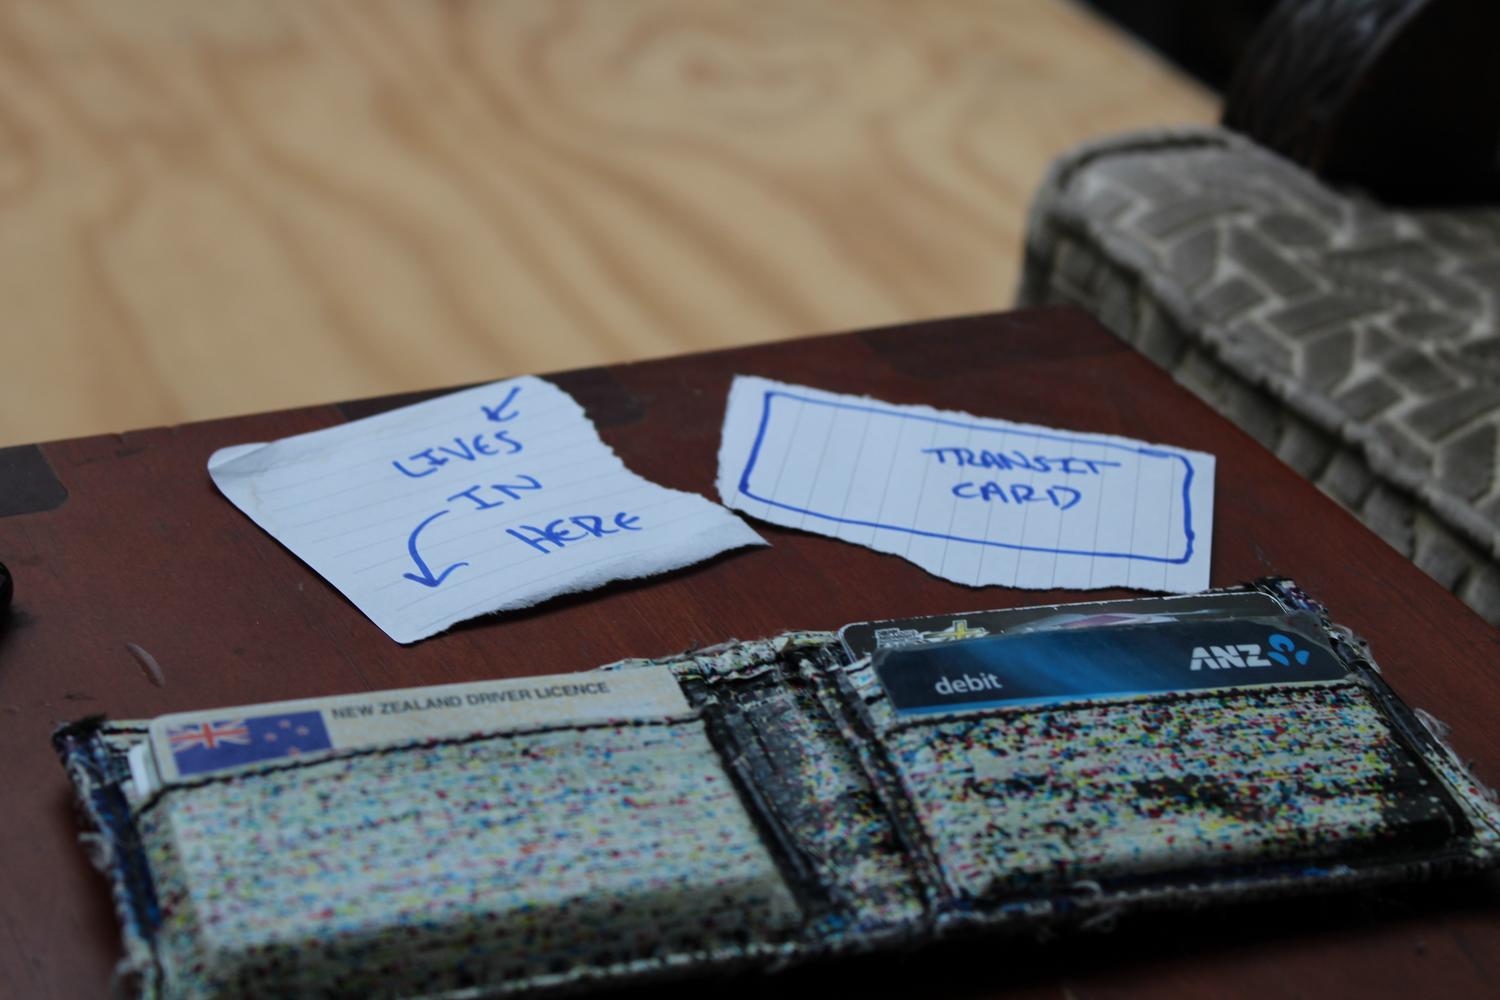 A close up photo of a table with my wallet folded open on it. A piece of paper represents my transit card as I no longer had it at the time of writing this post.